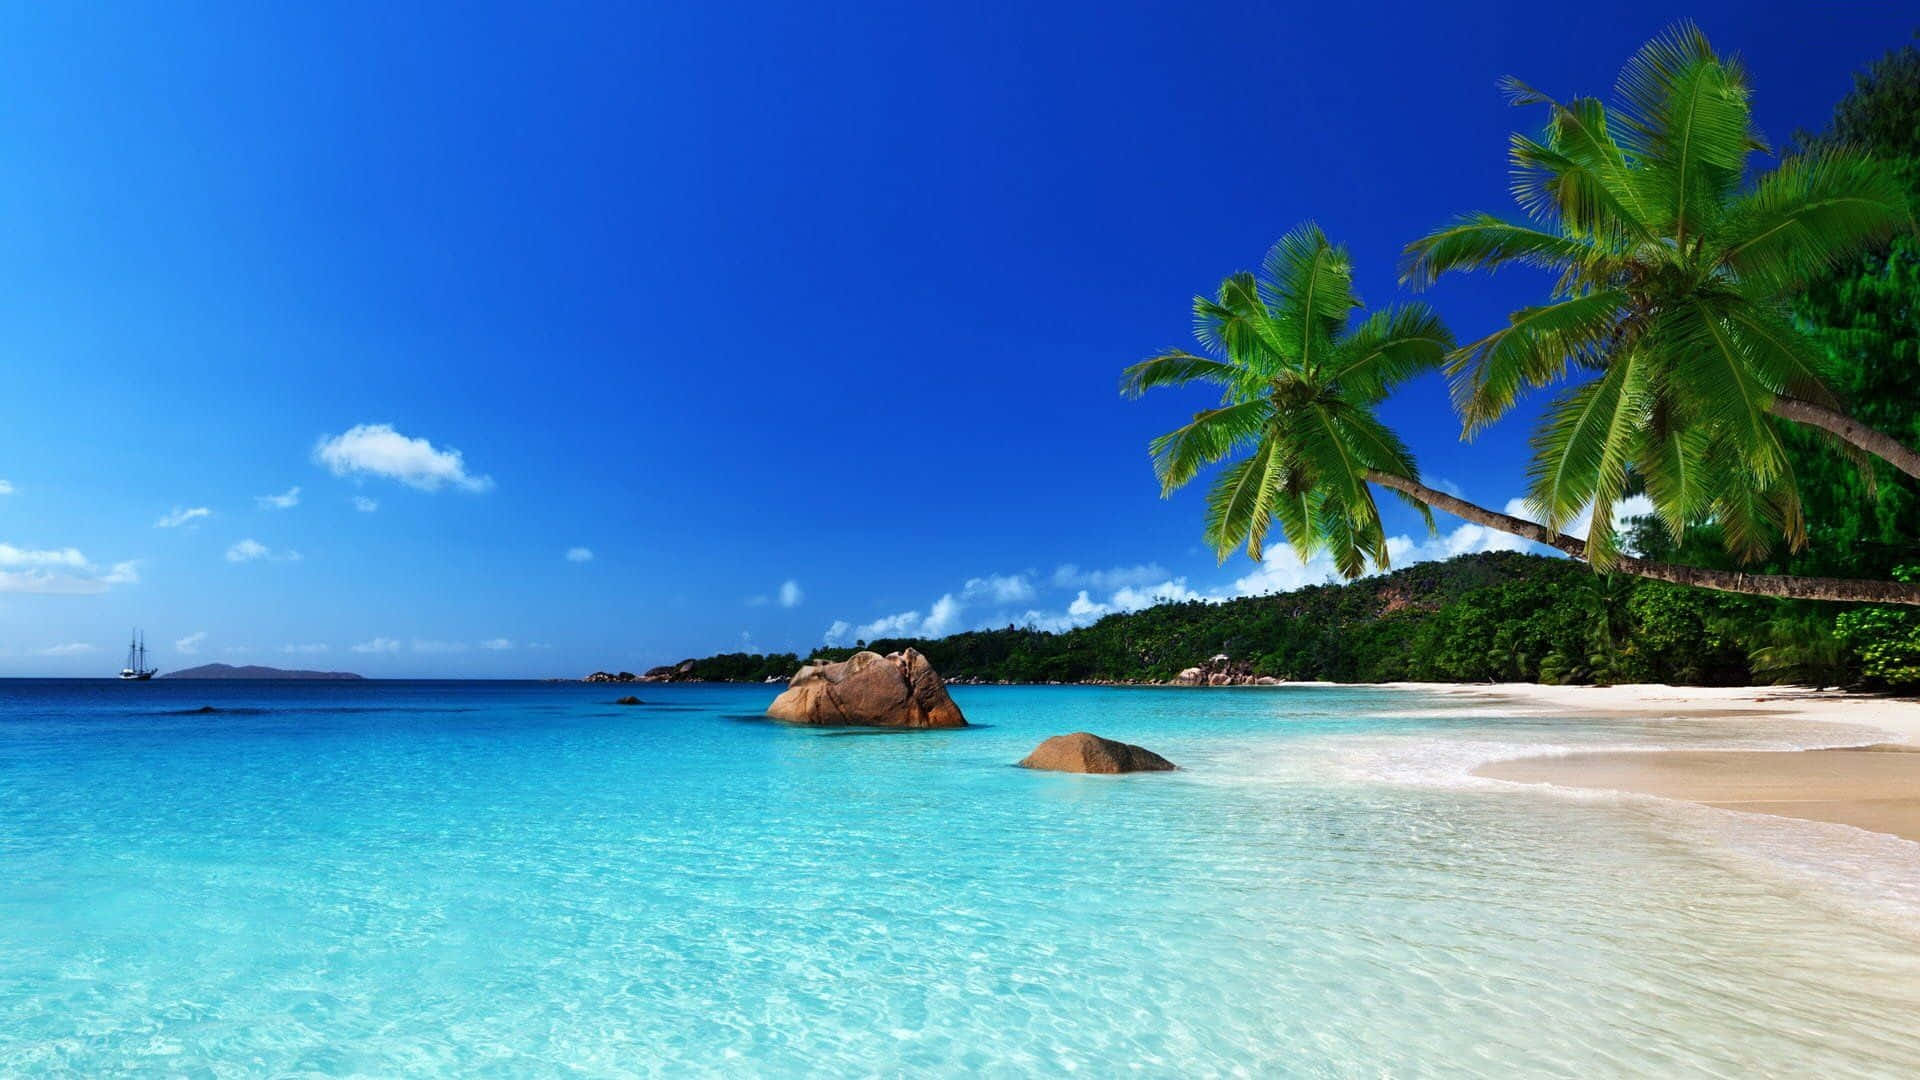 A Beach With Palm Trees And Clear Water